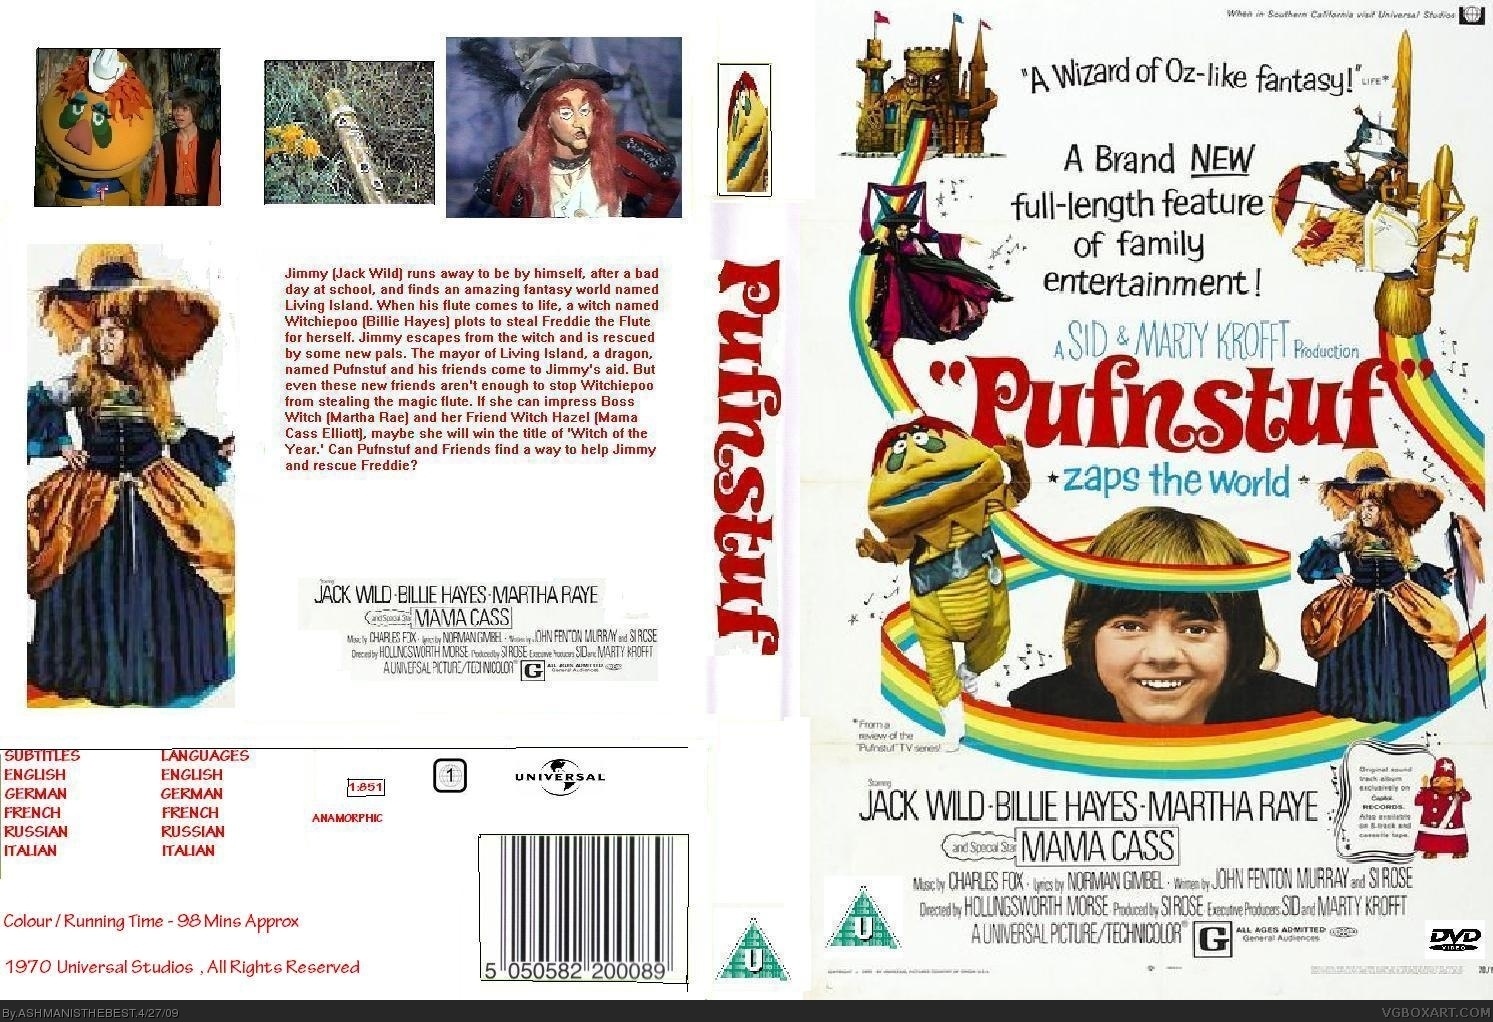 Pufnstuf The Movie box cover